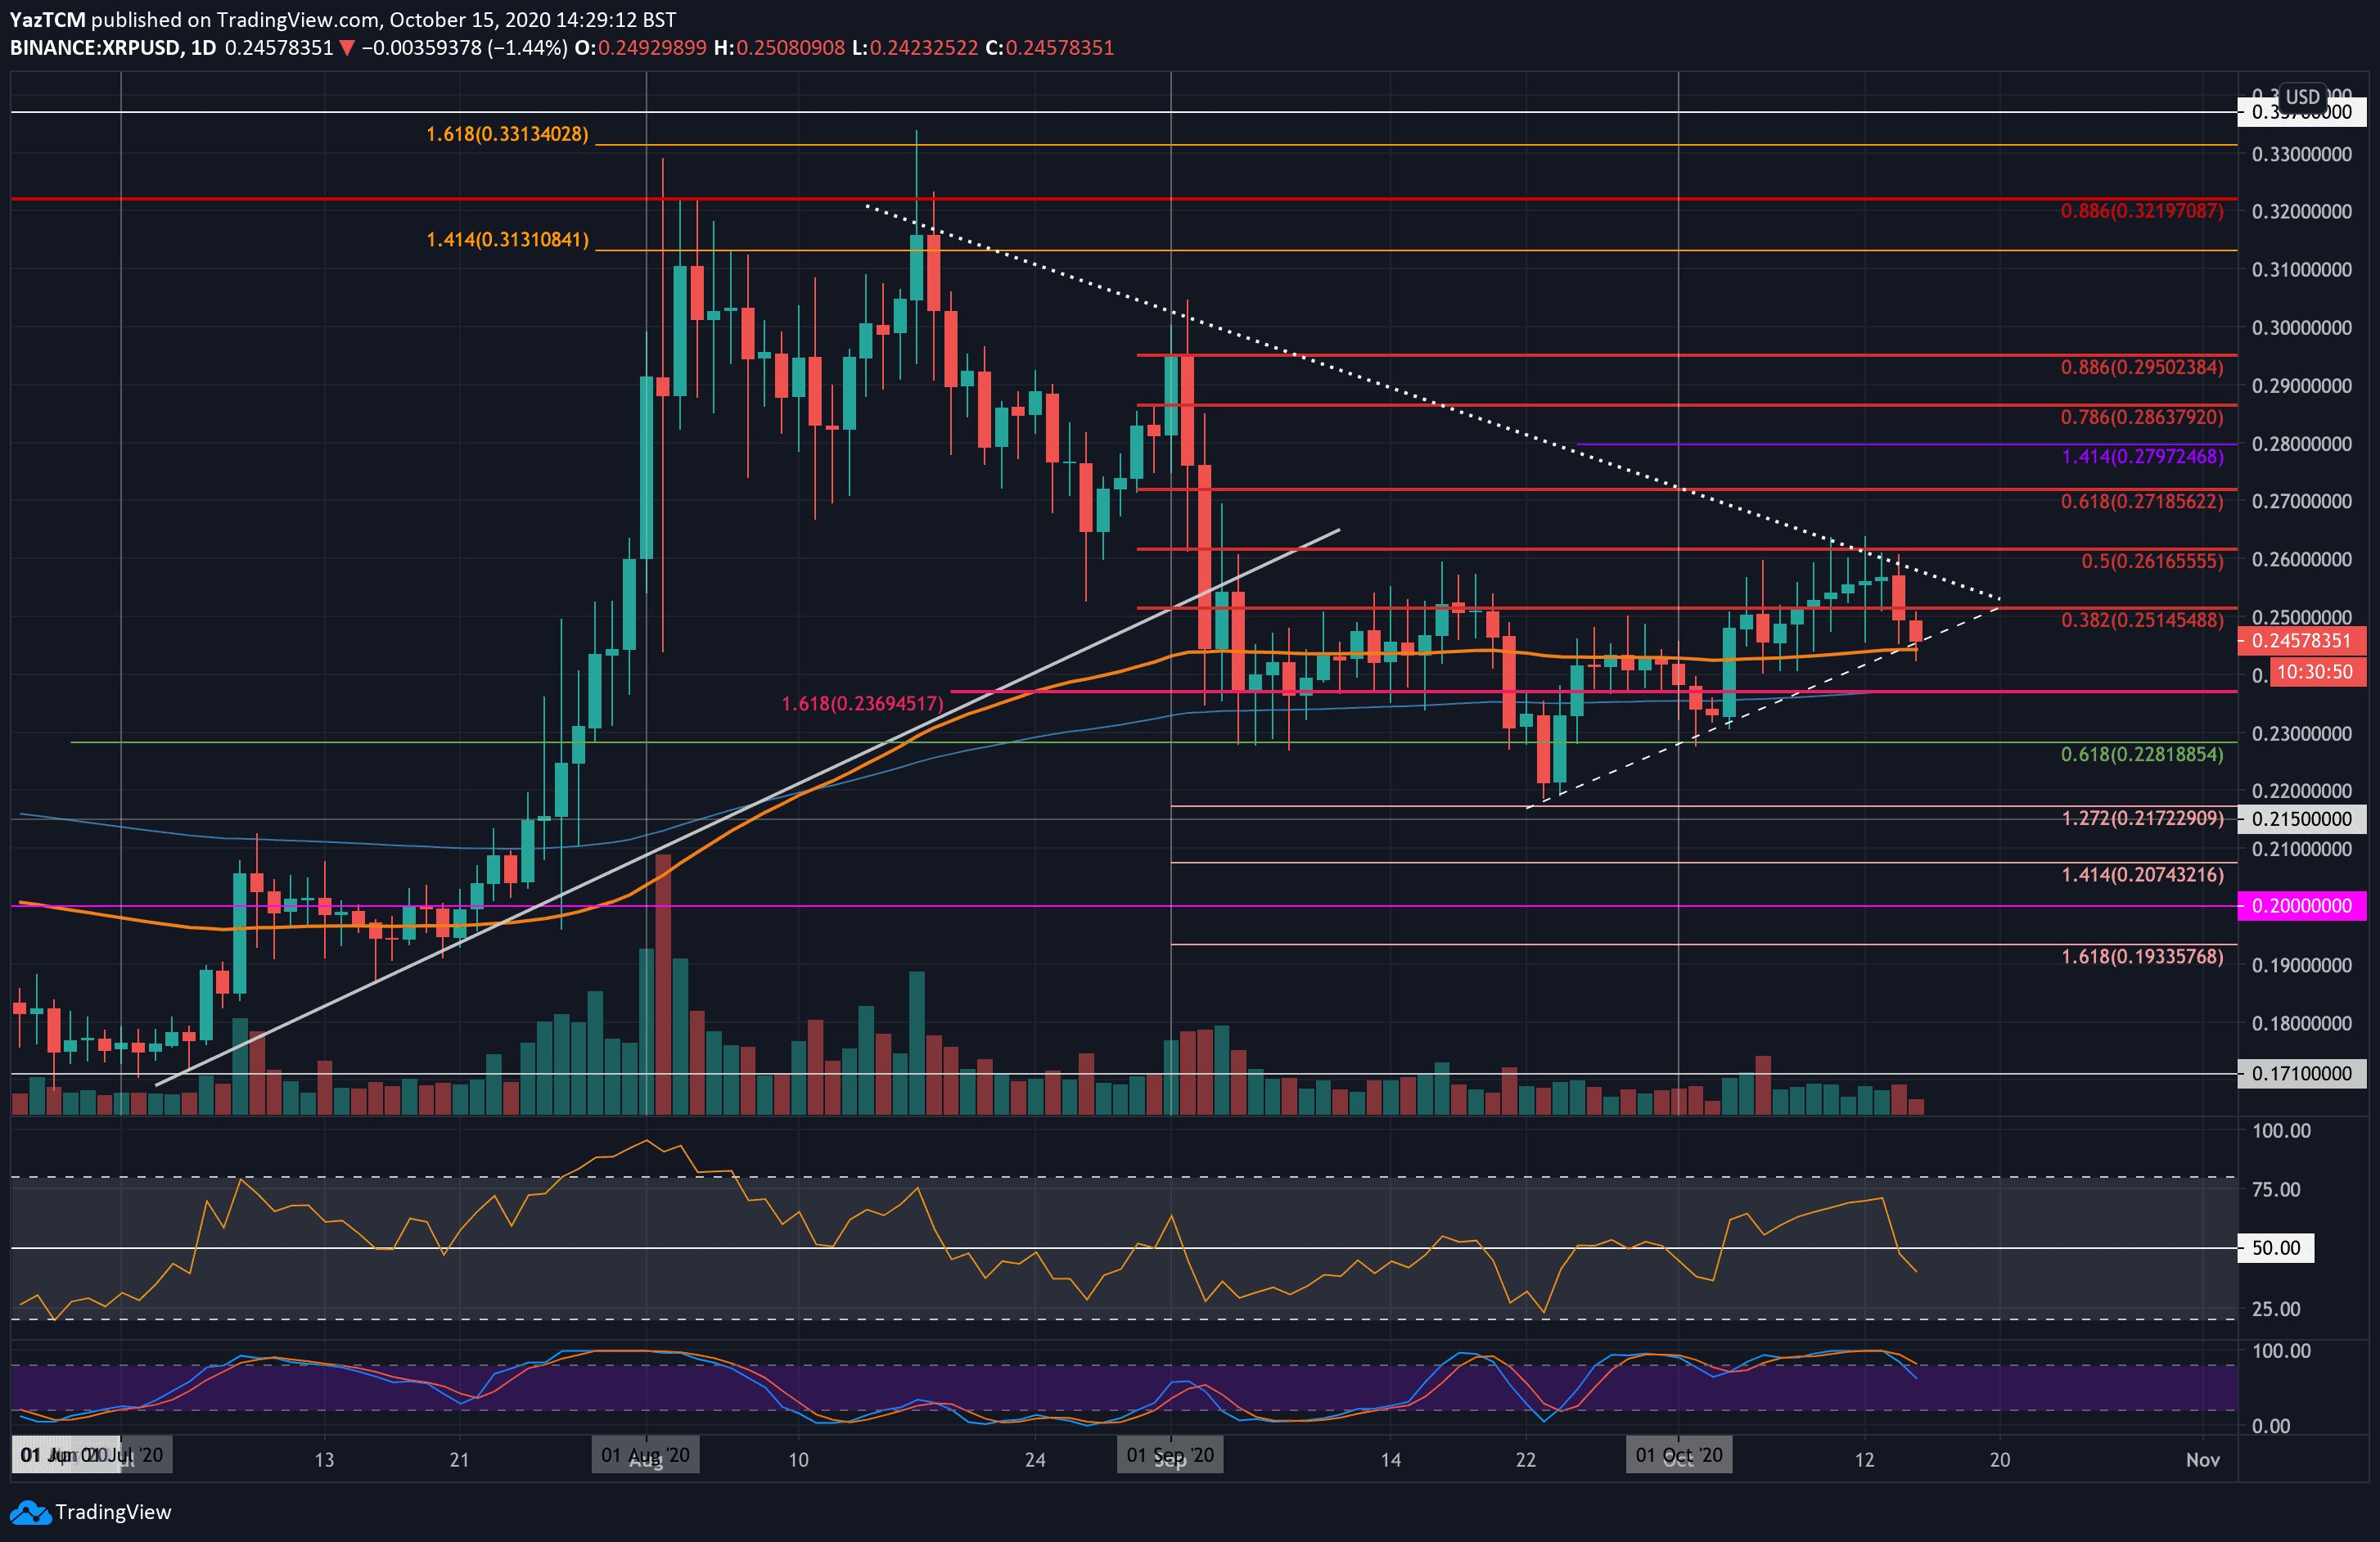 Ripple-bears-resurface-to-test-100-ema-support,-will-it-hold?-(xrp-price-analysis)